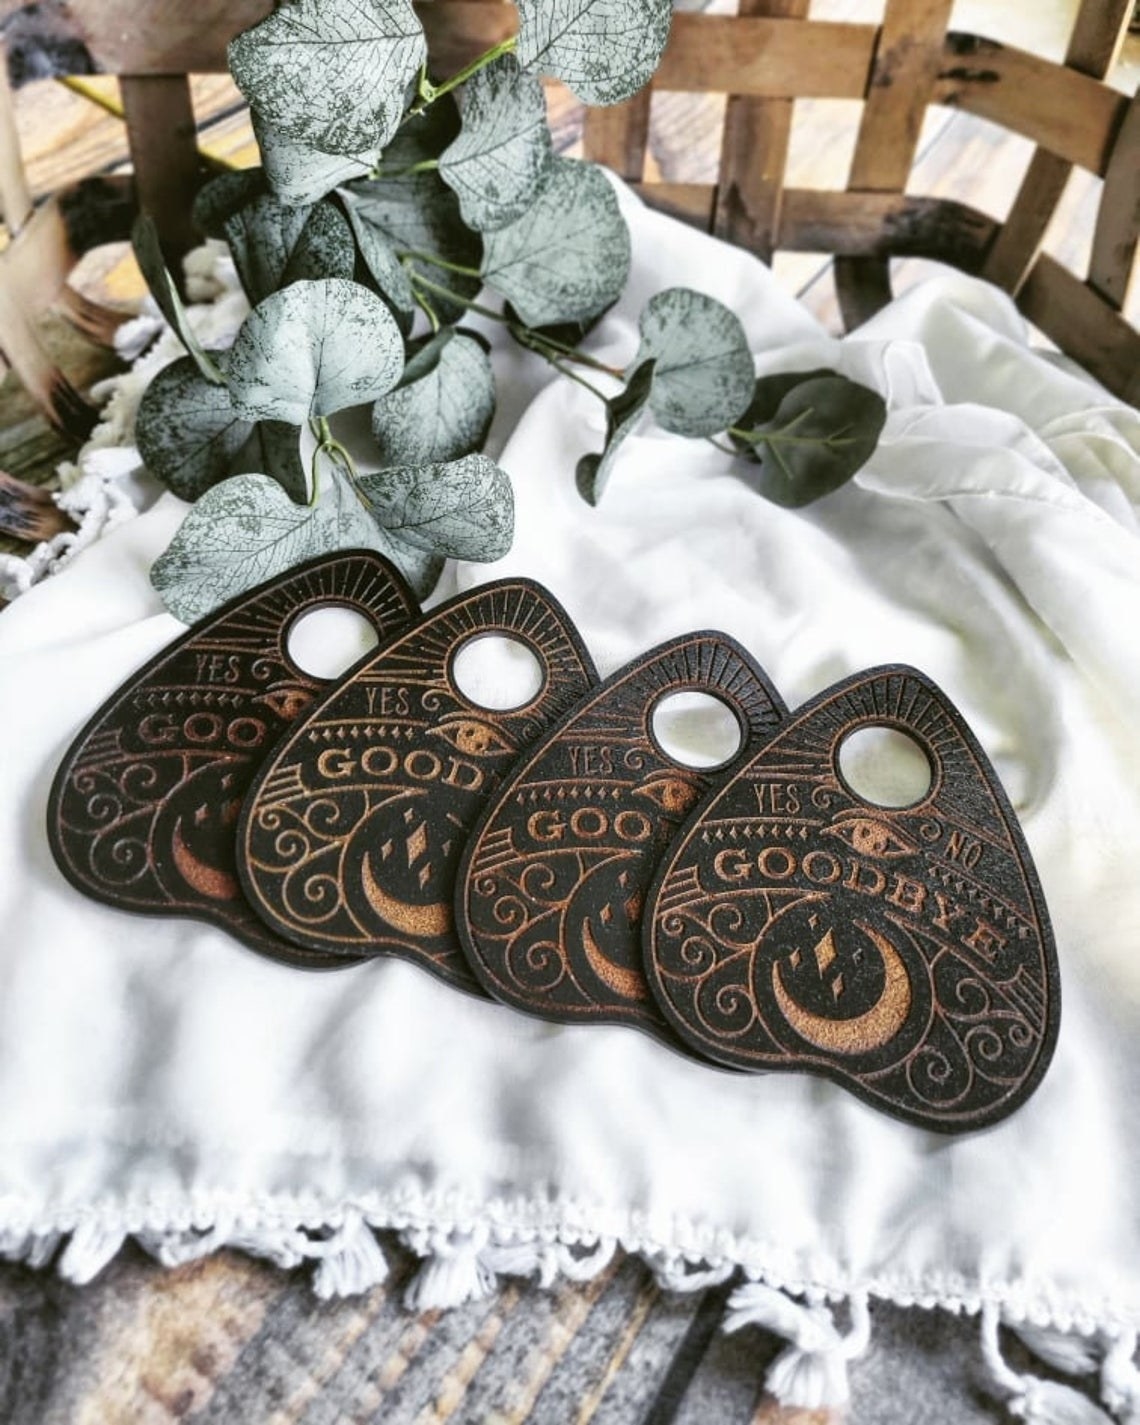 planchette coasters that say goodbye with a moon on the bottom